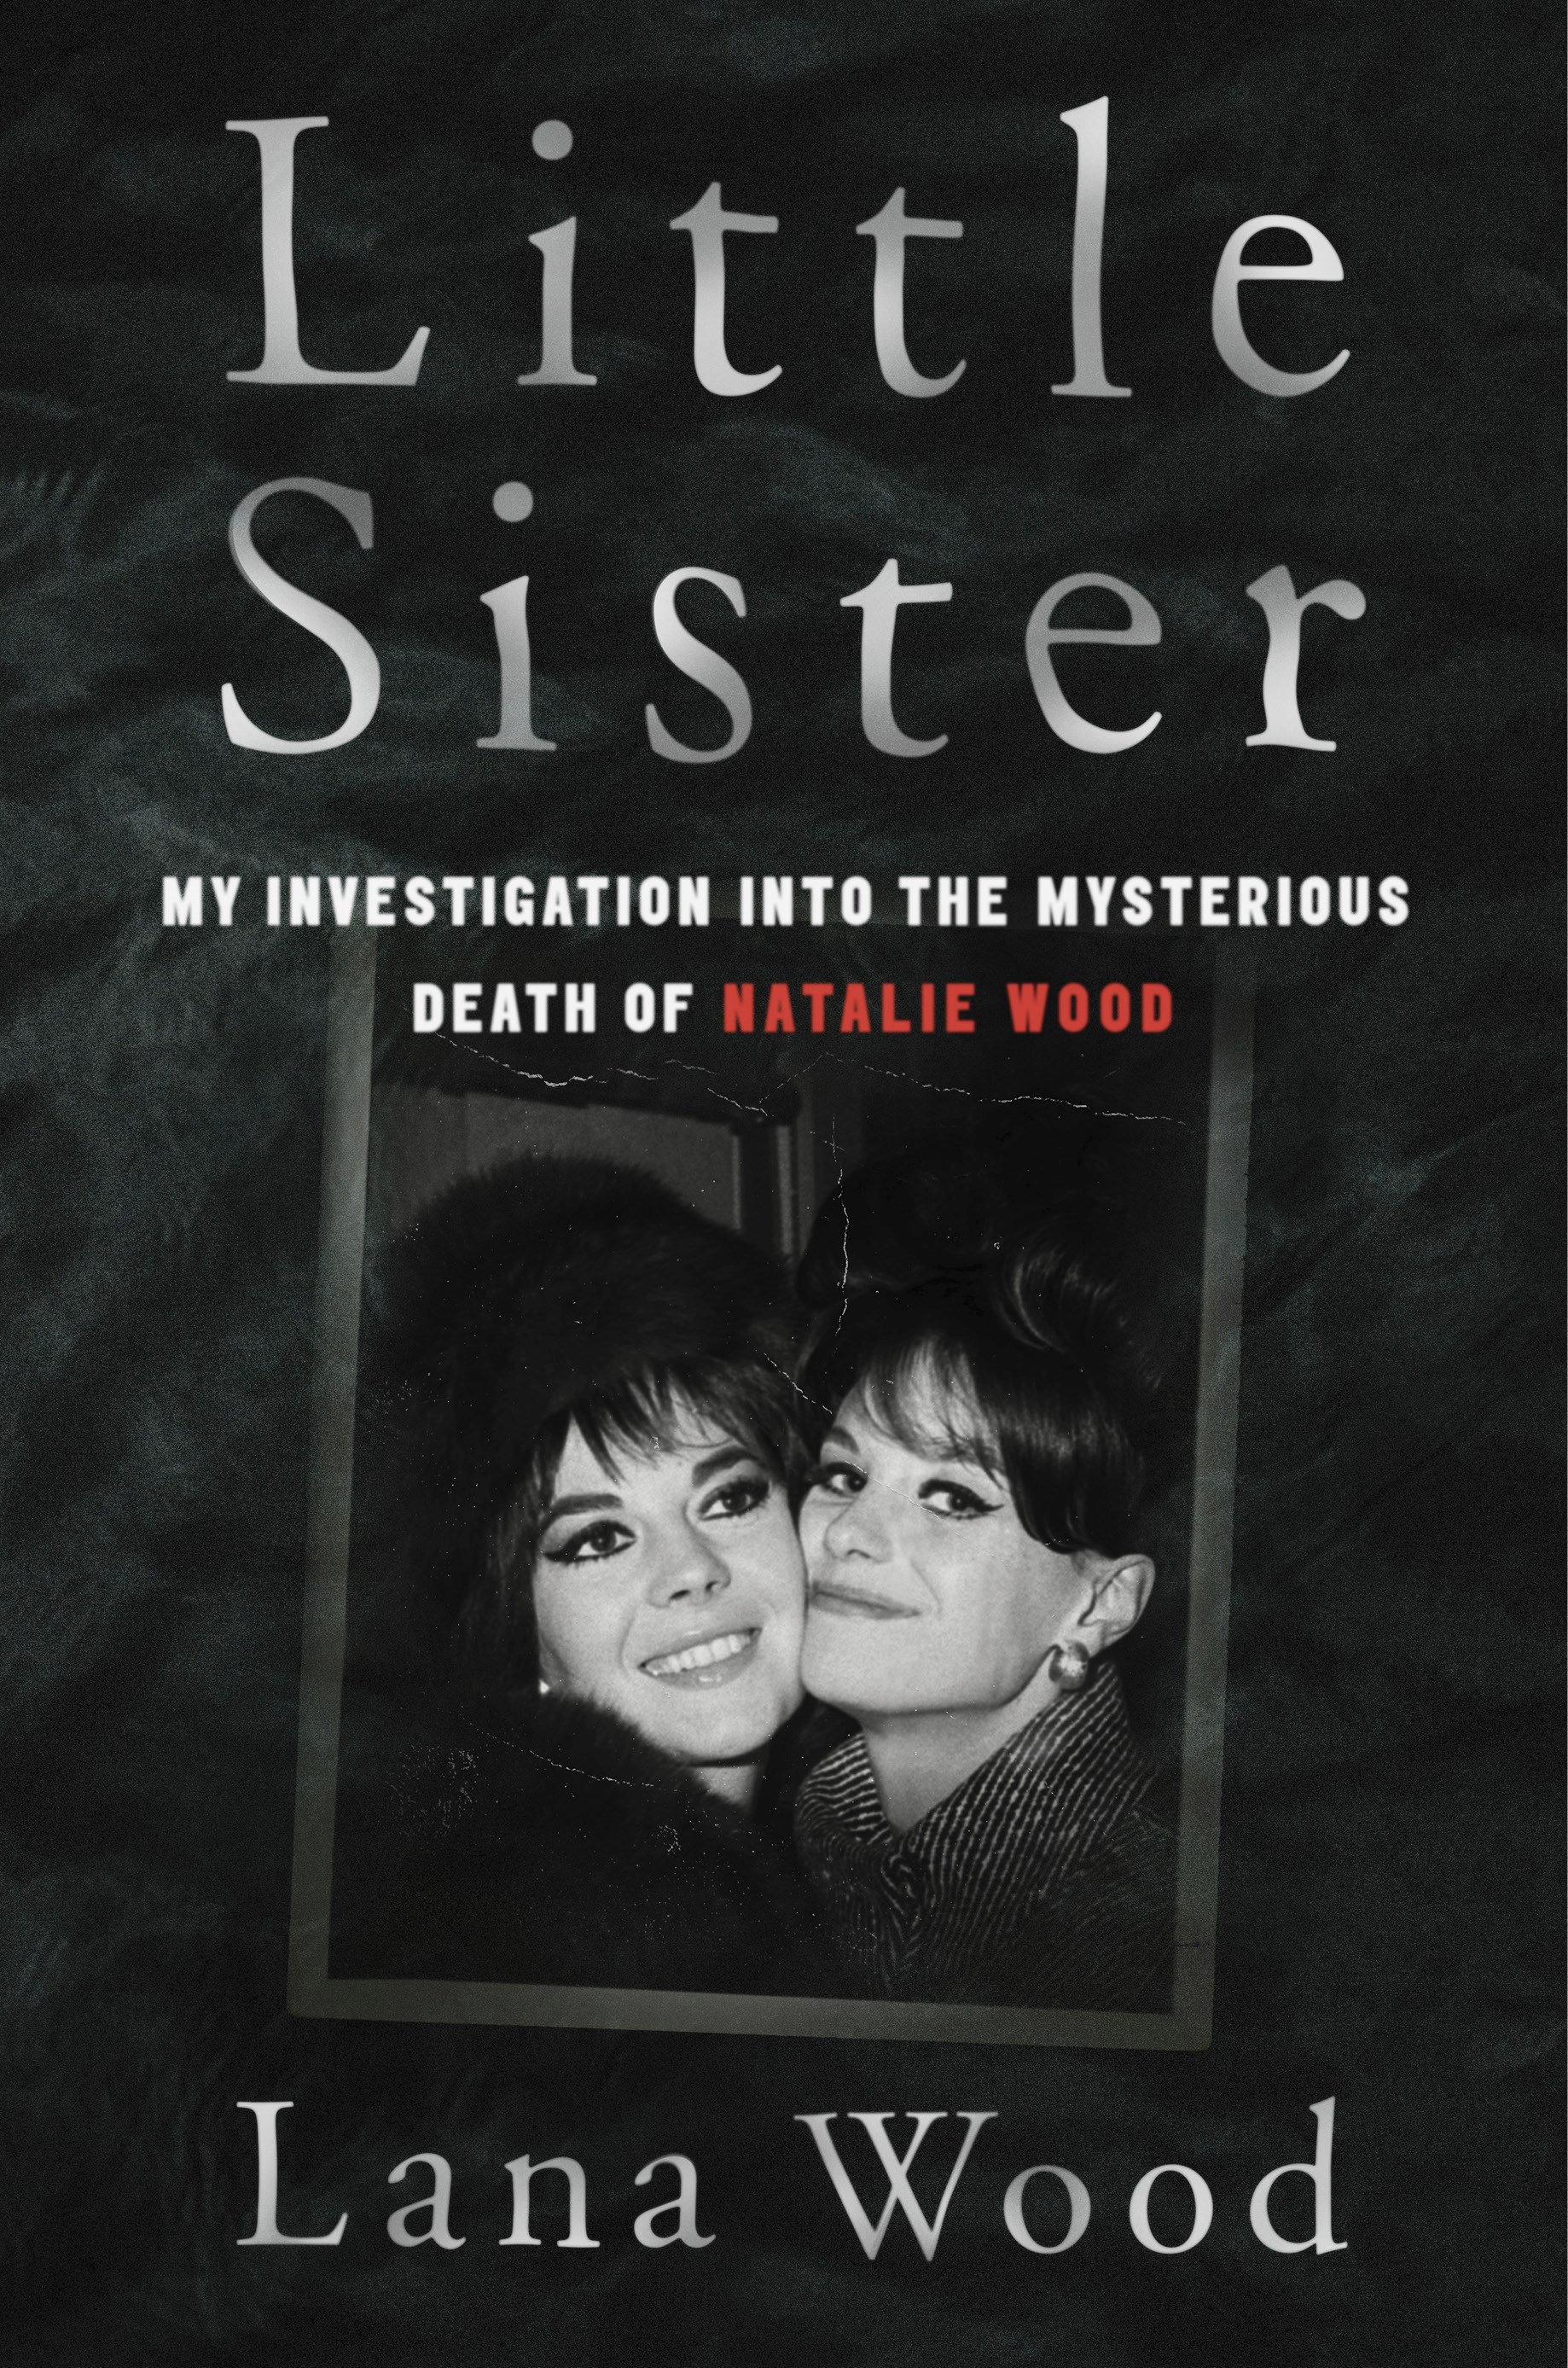 The cover of Little Sister: My Investigation Into The Mysterious Death Of Natalie Wood by Lana Wood